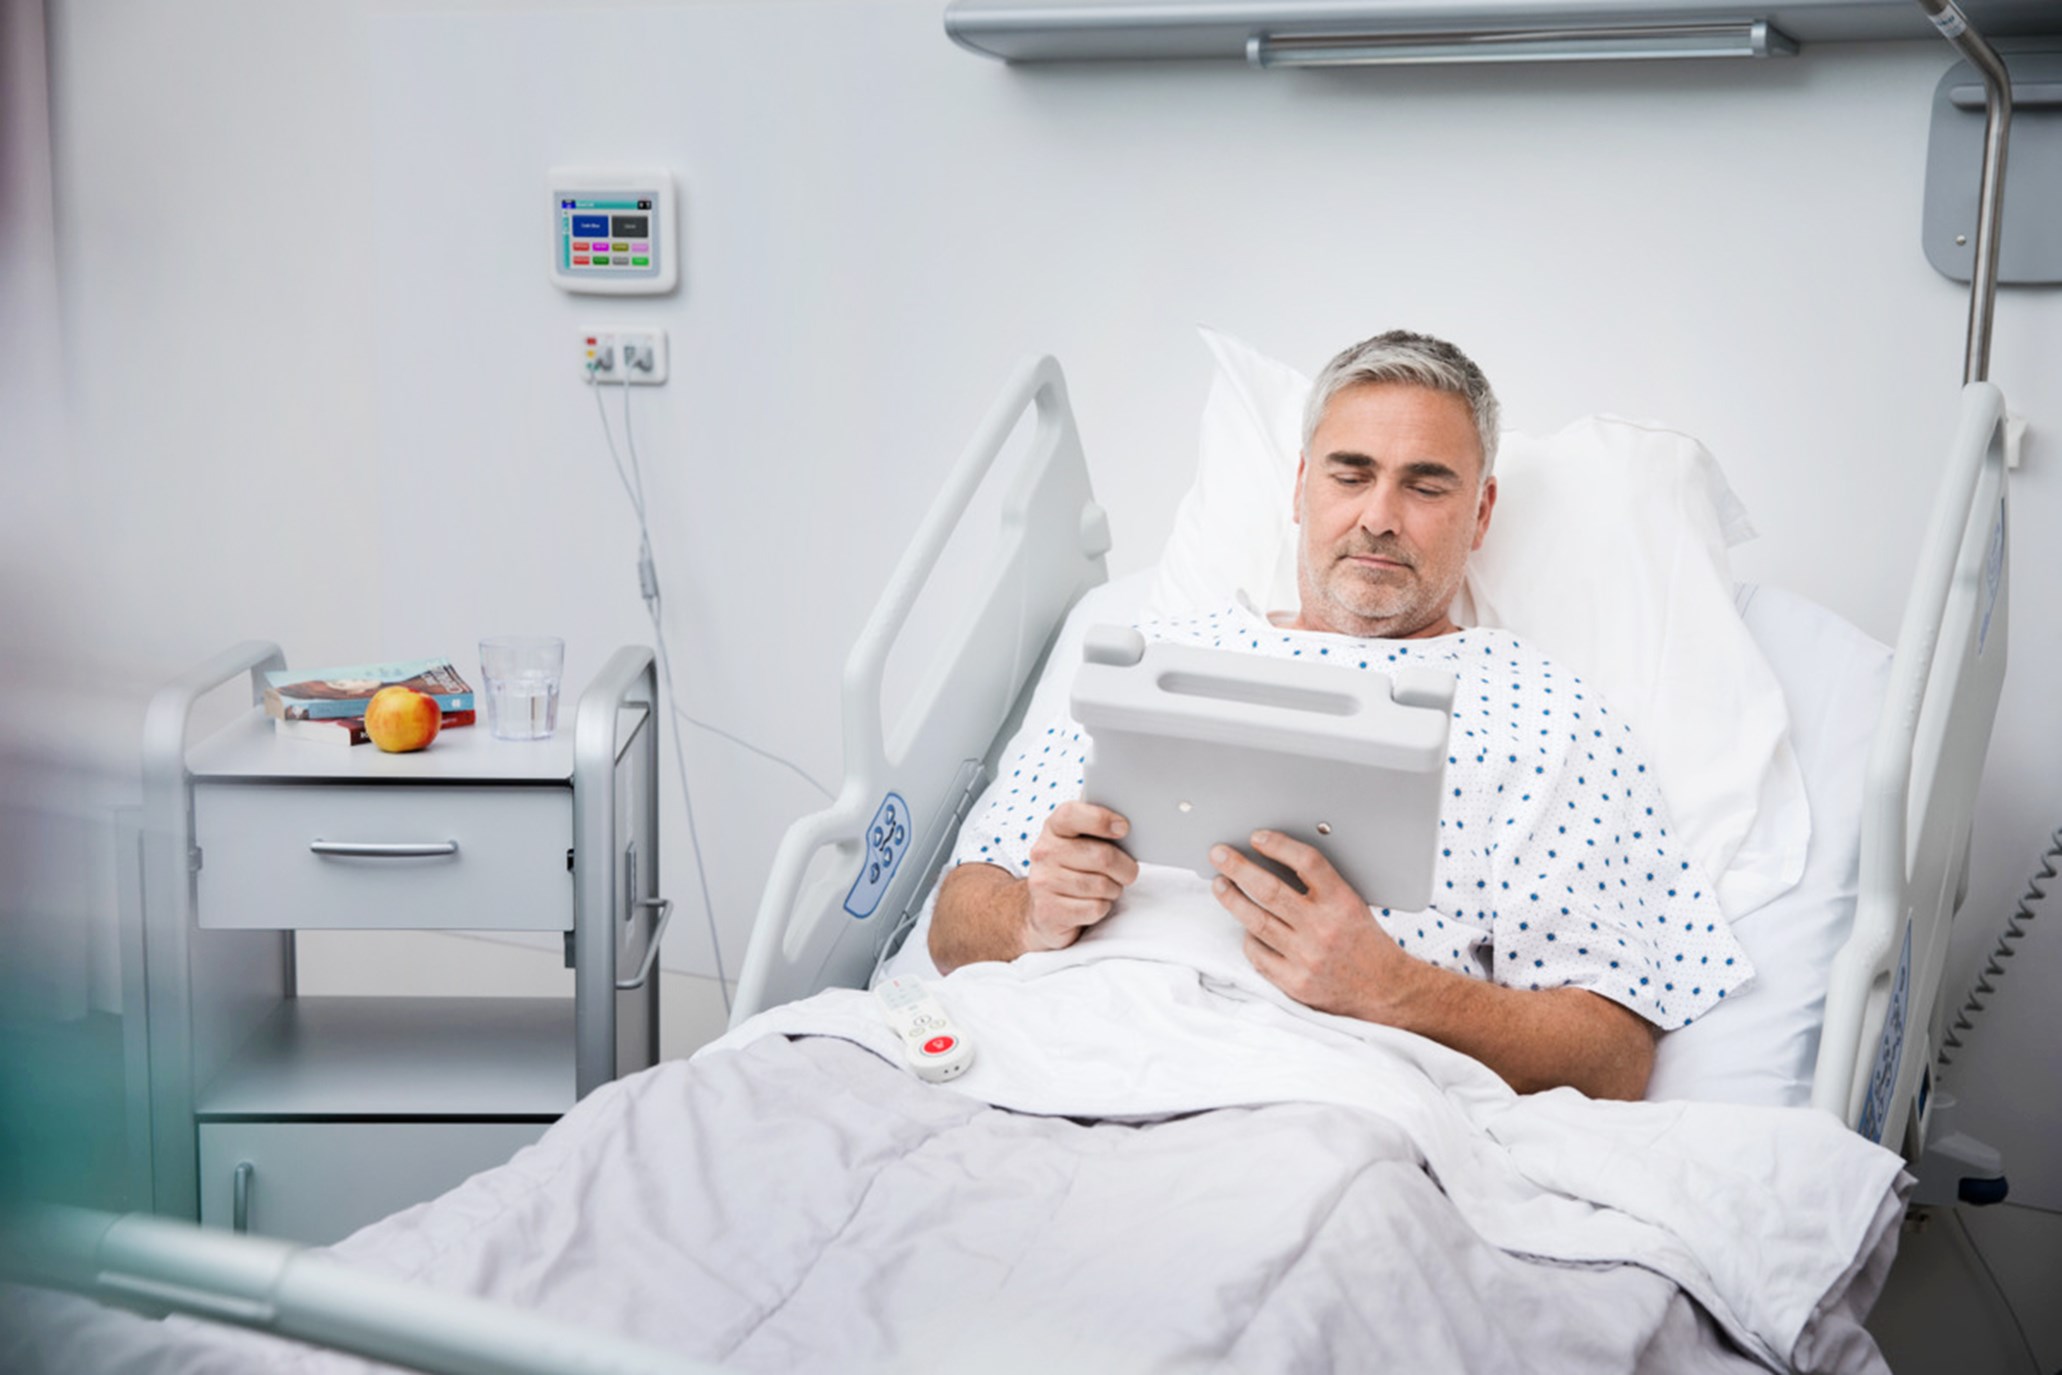 Male patient in bed, holding a tablet.